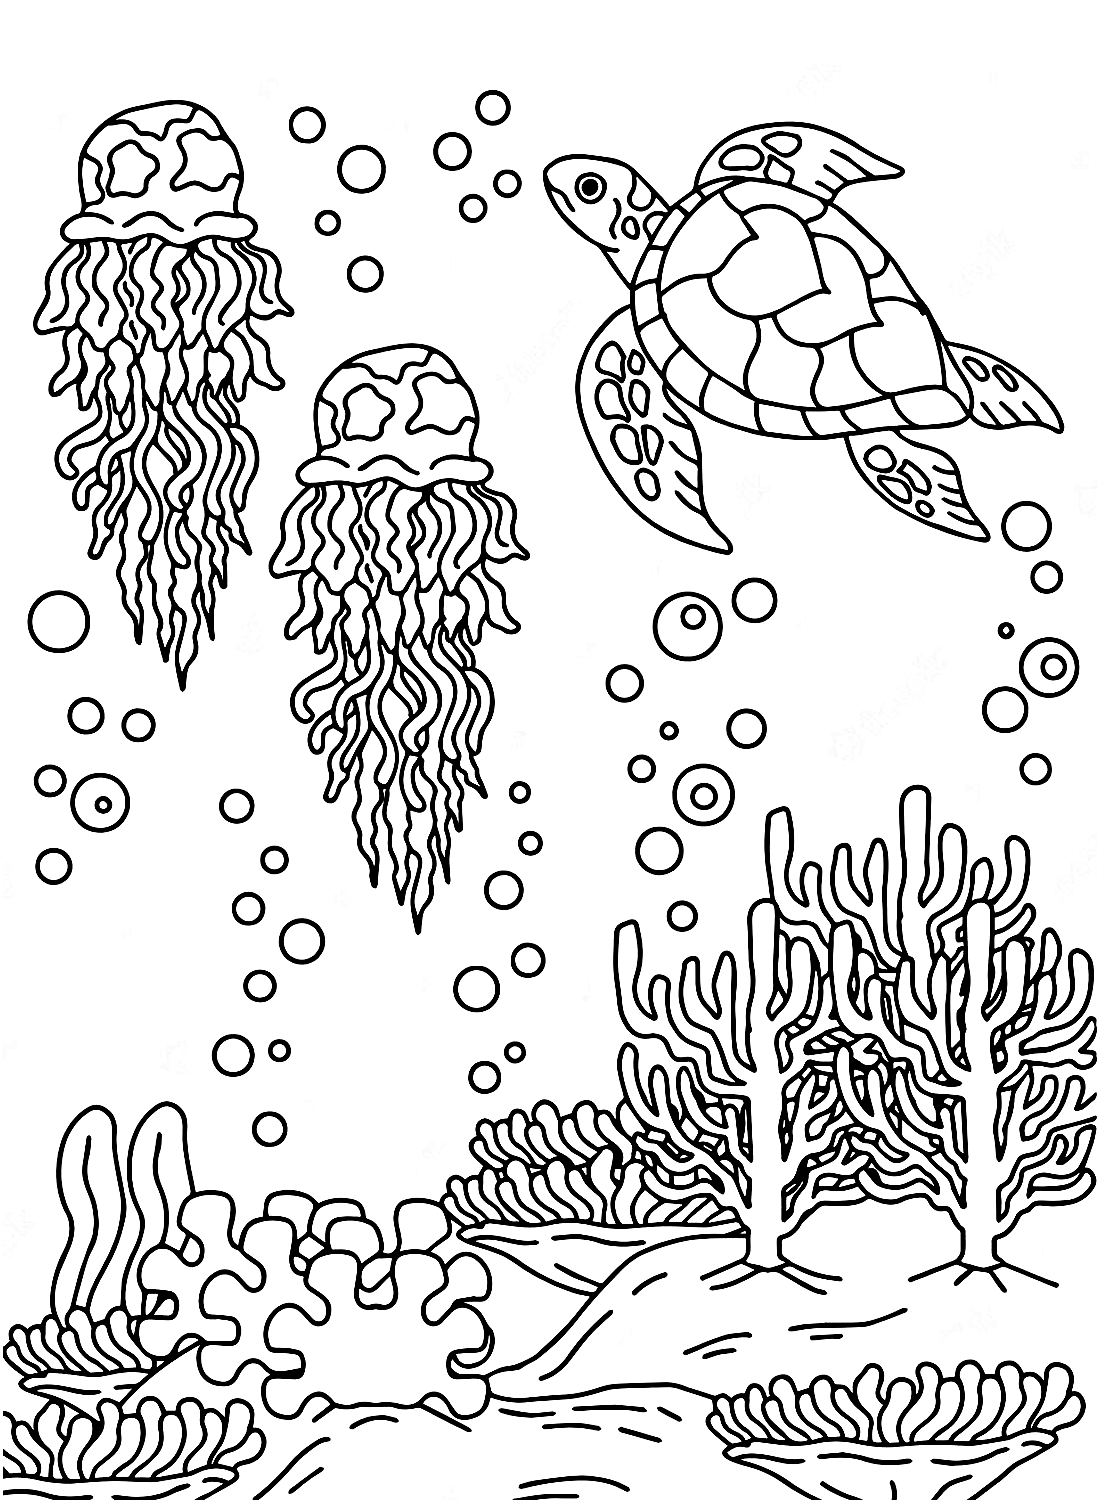 Coral reef Coloring Page